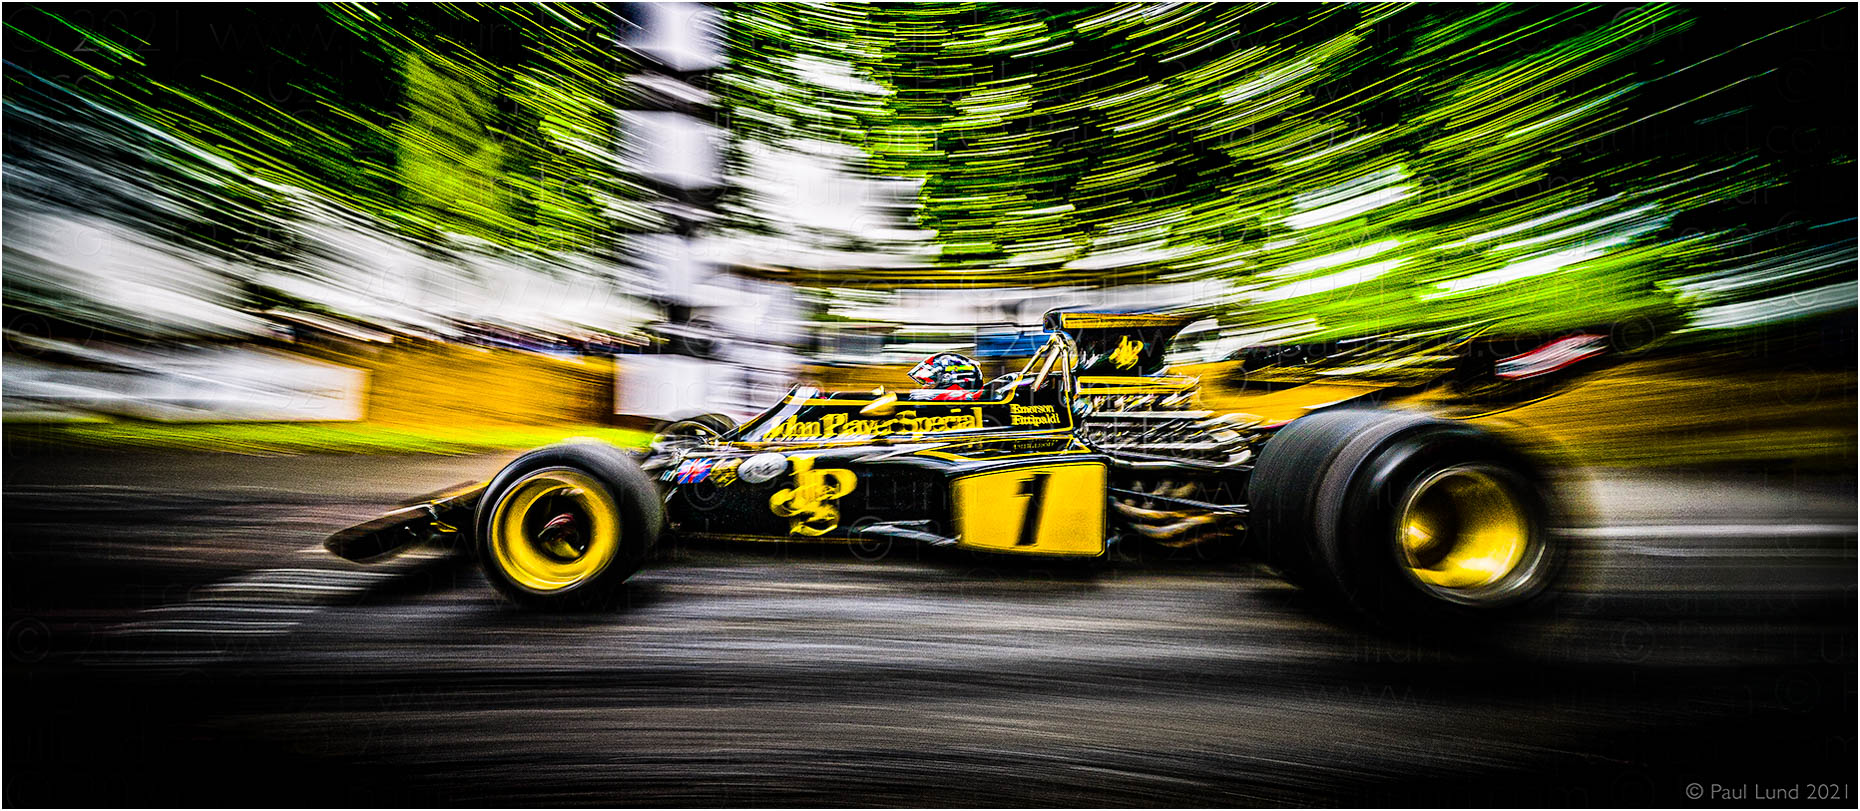 1972 World Champion Emerson Fittipaldi in the John Player Special Lotus Cosworth 72 at Goodwood Festival of Speed 2021. Photographer: Paul Lund